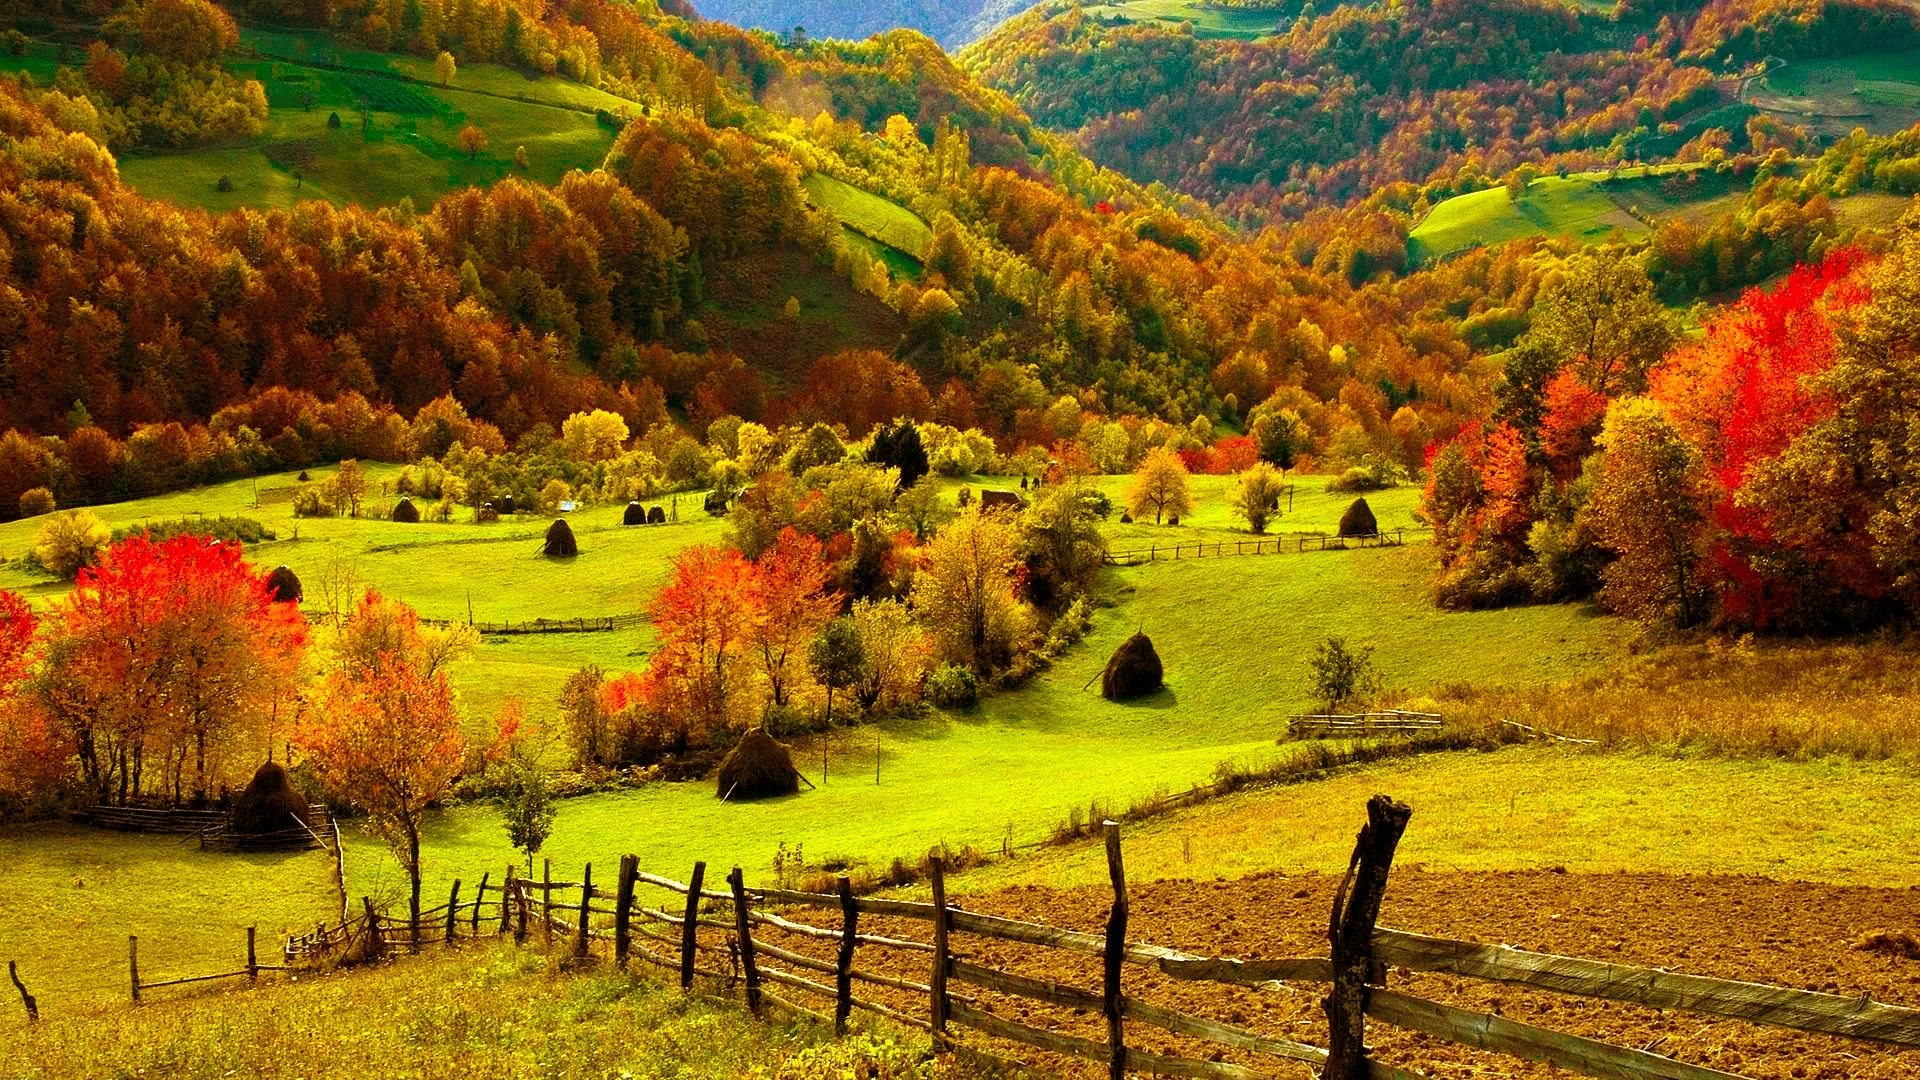 Landscapes Fields Hills Fence Grass Farm Trees Forests Autumn Fall